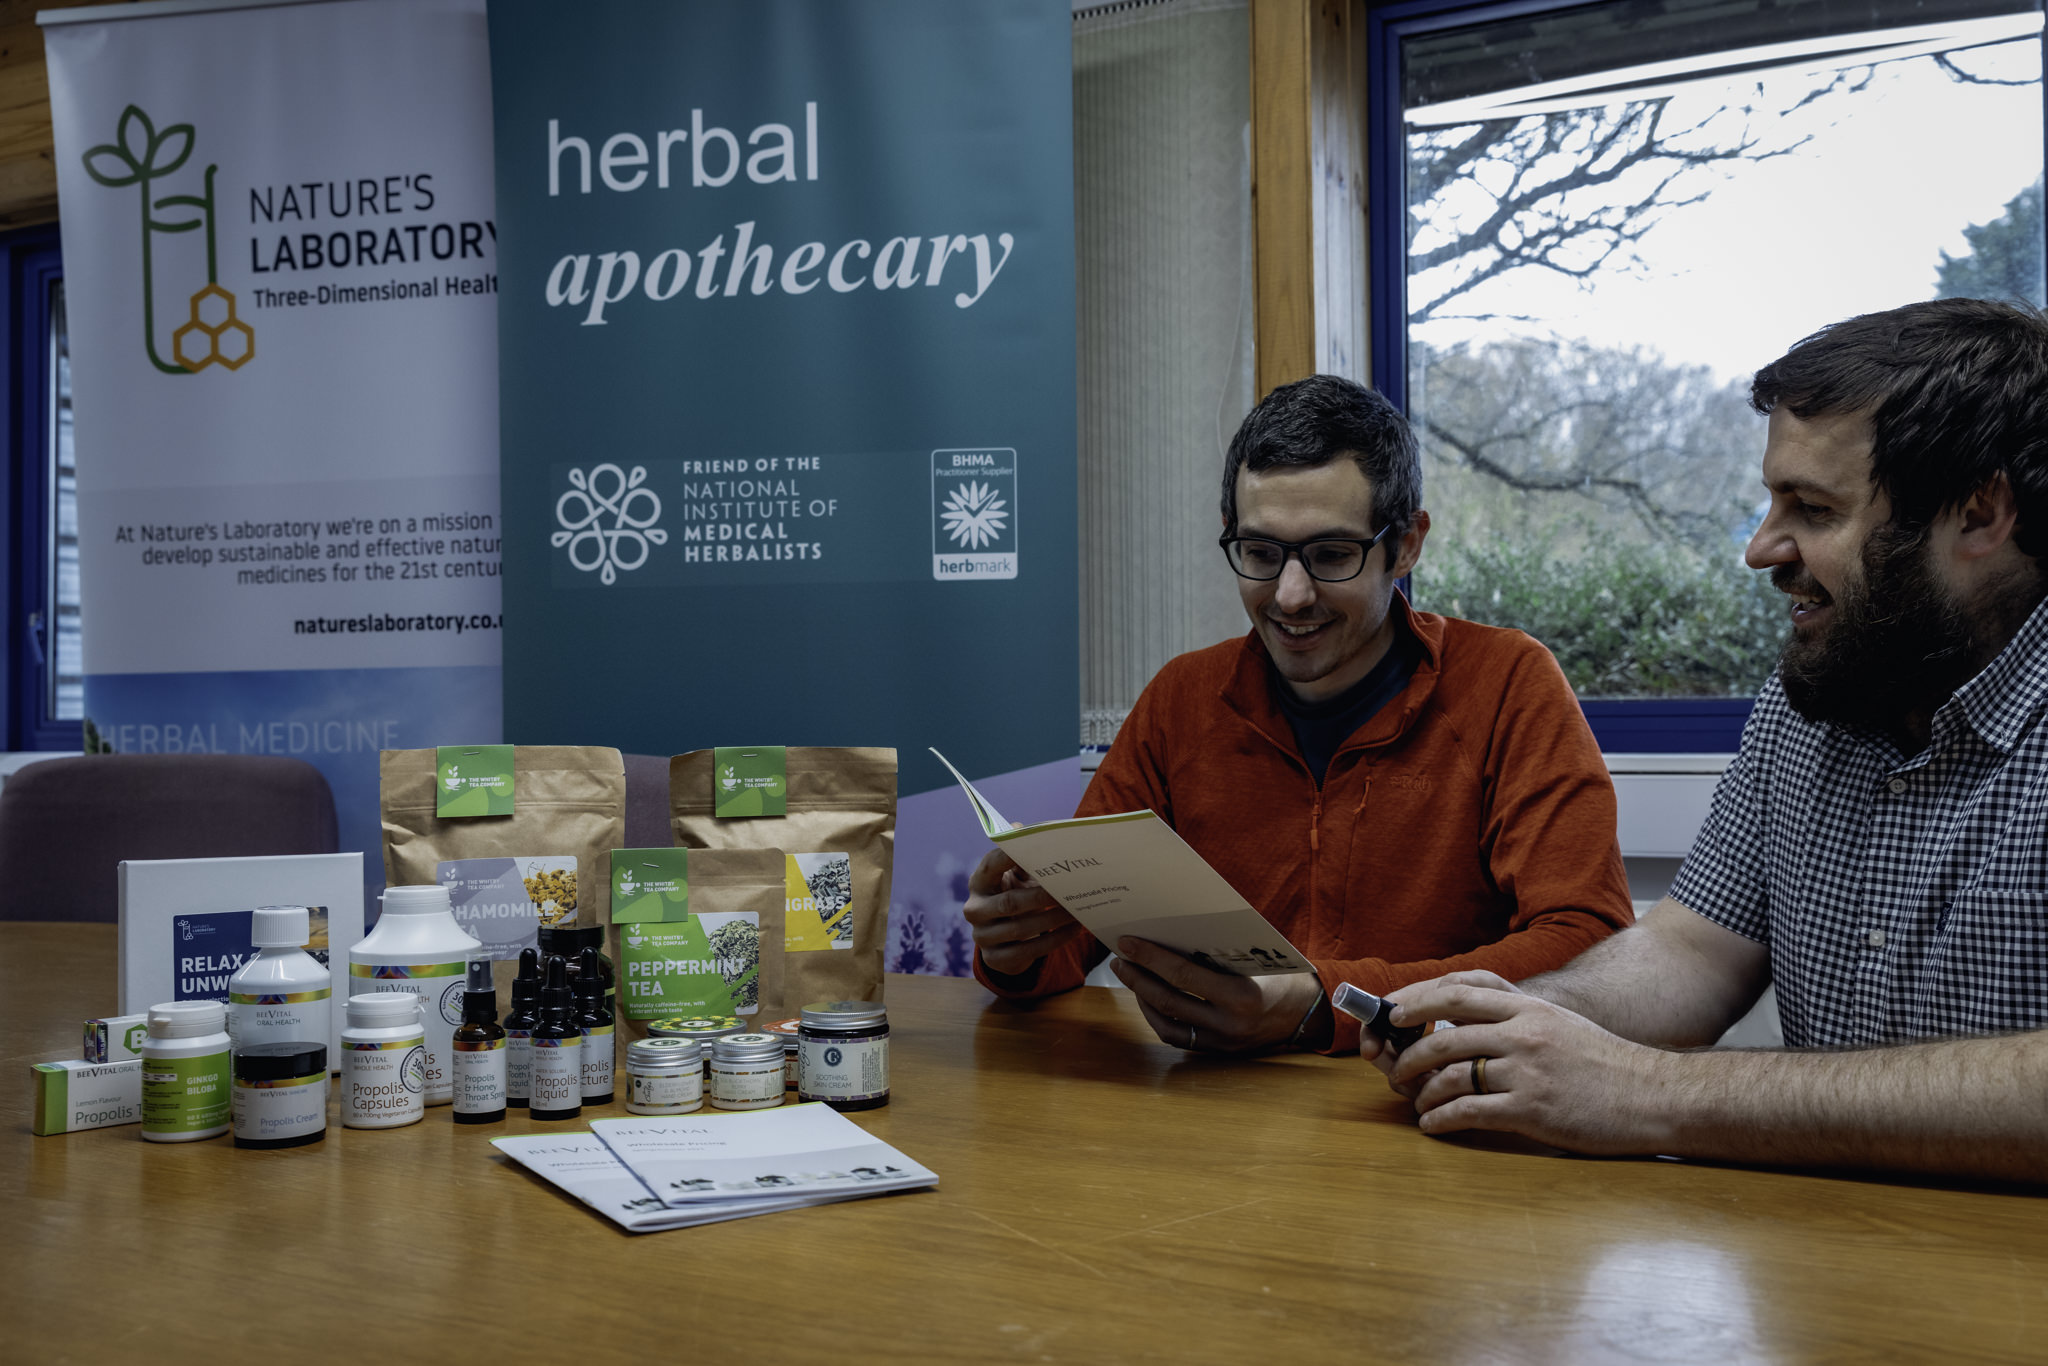 Two men sit at a table with some herbal supplements, behind them are two banners for herbal supplements